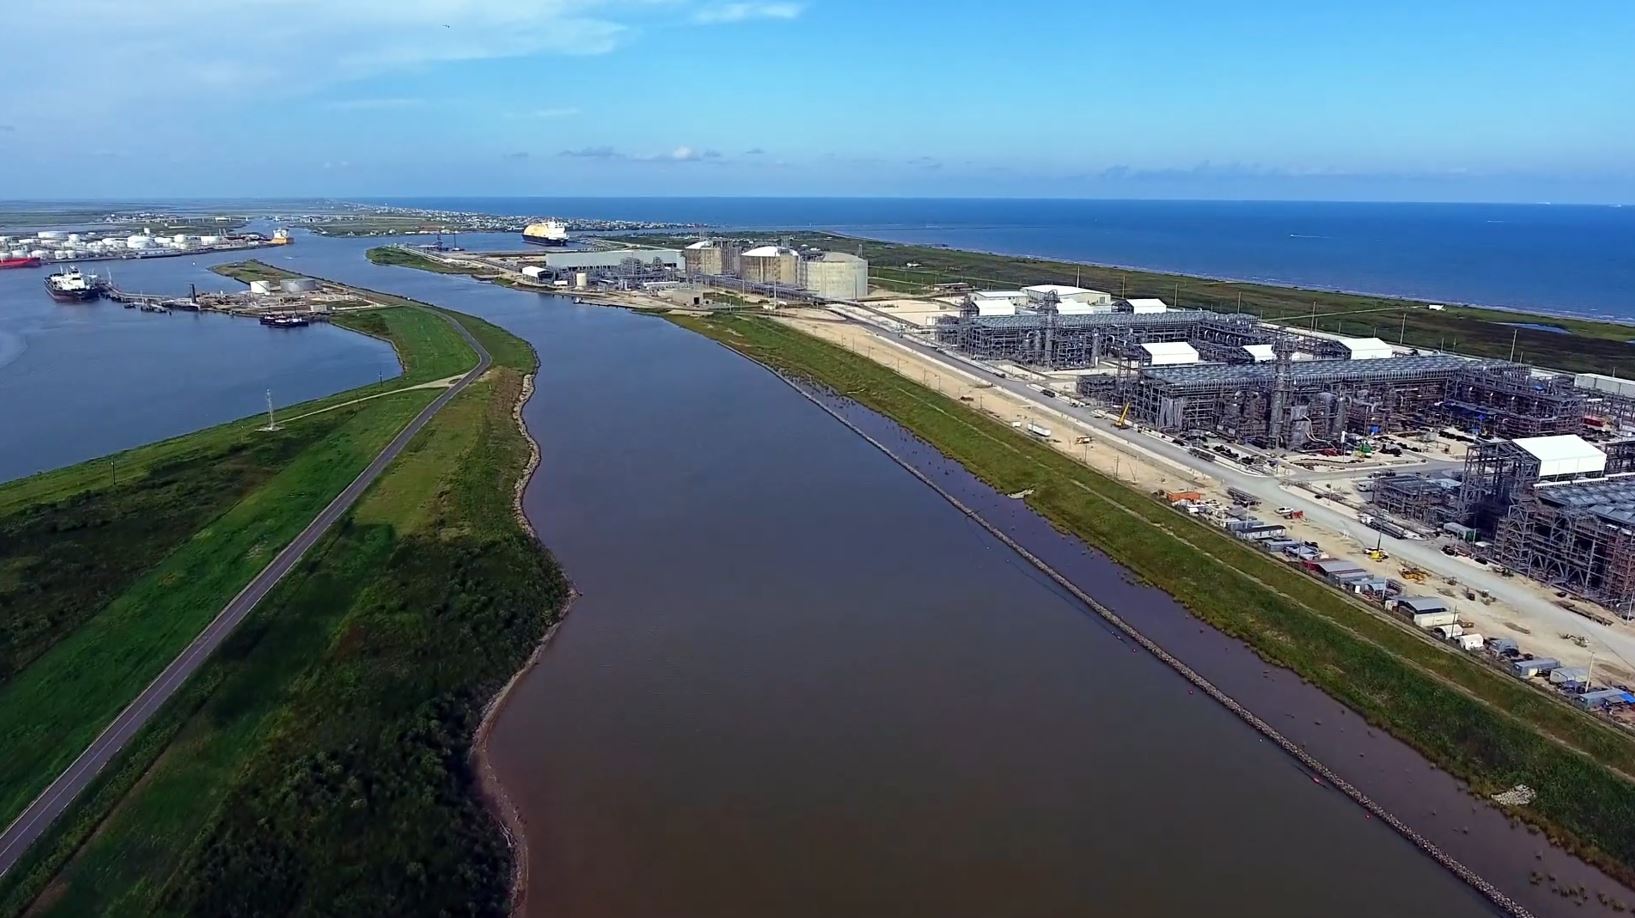 PHMSA Freeport LNG must complete several actions prior to restart